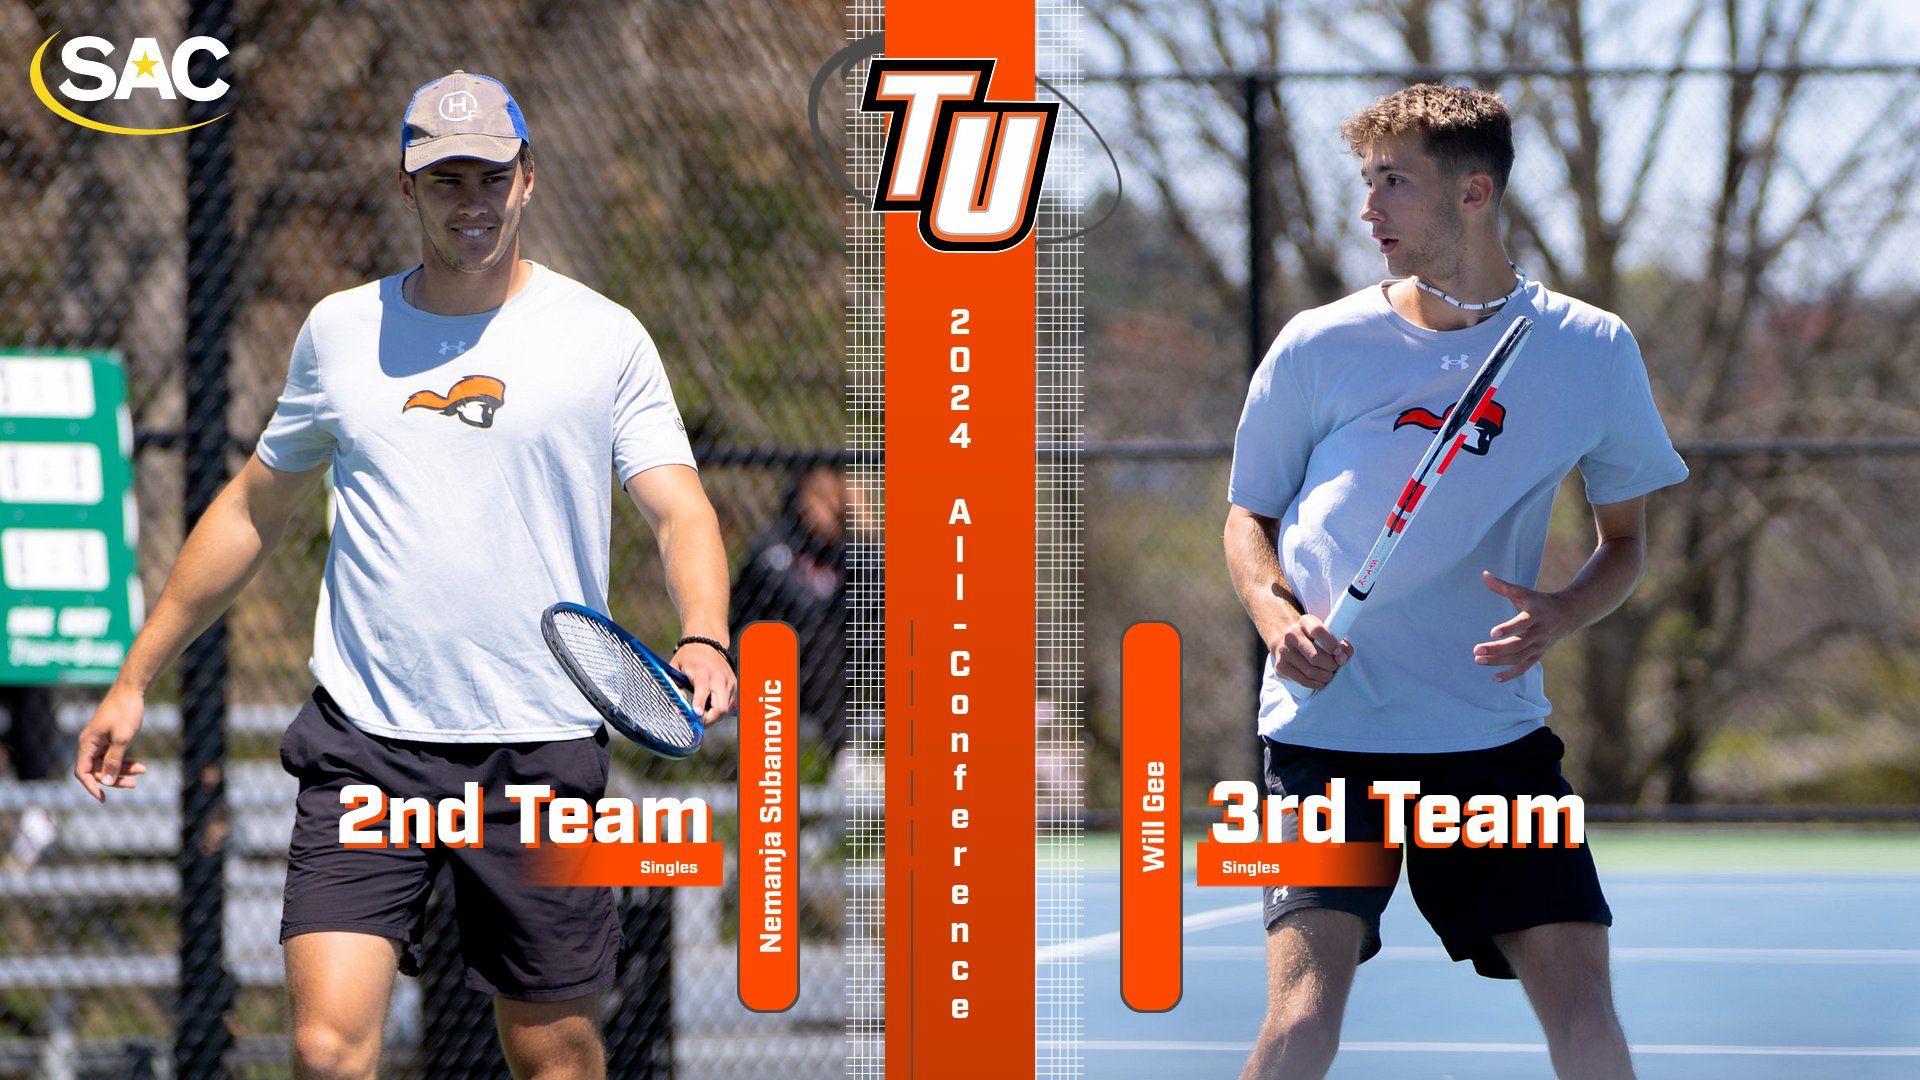 Subanovic, Gee named All-Conference in singles